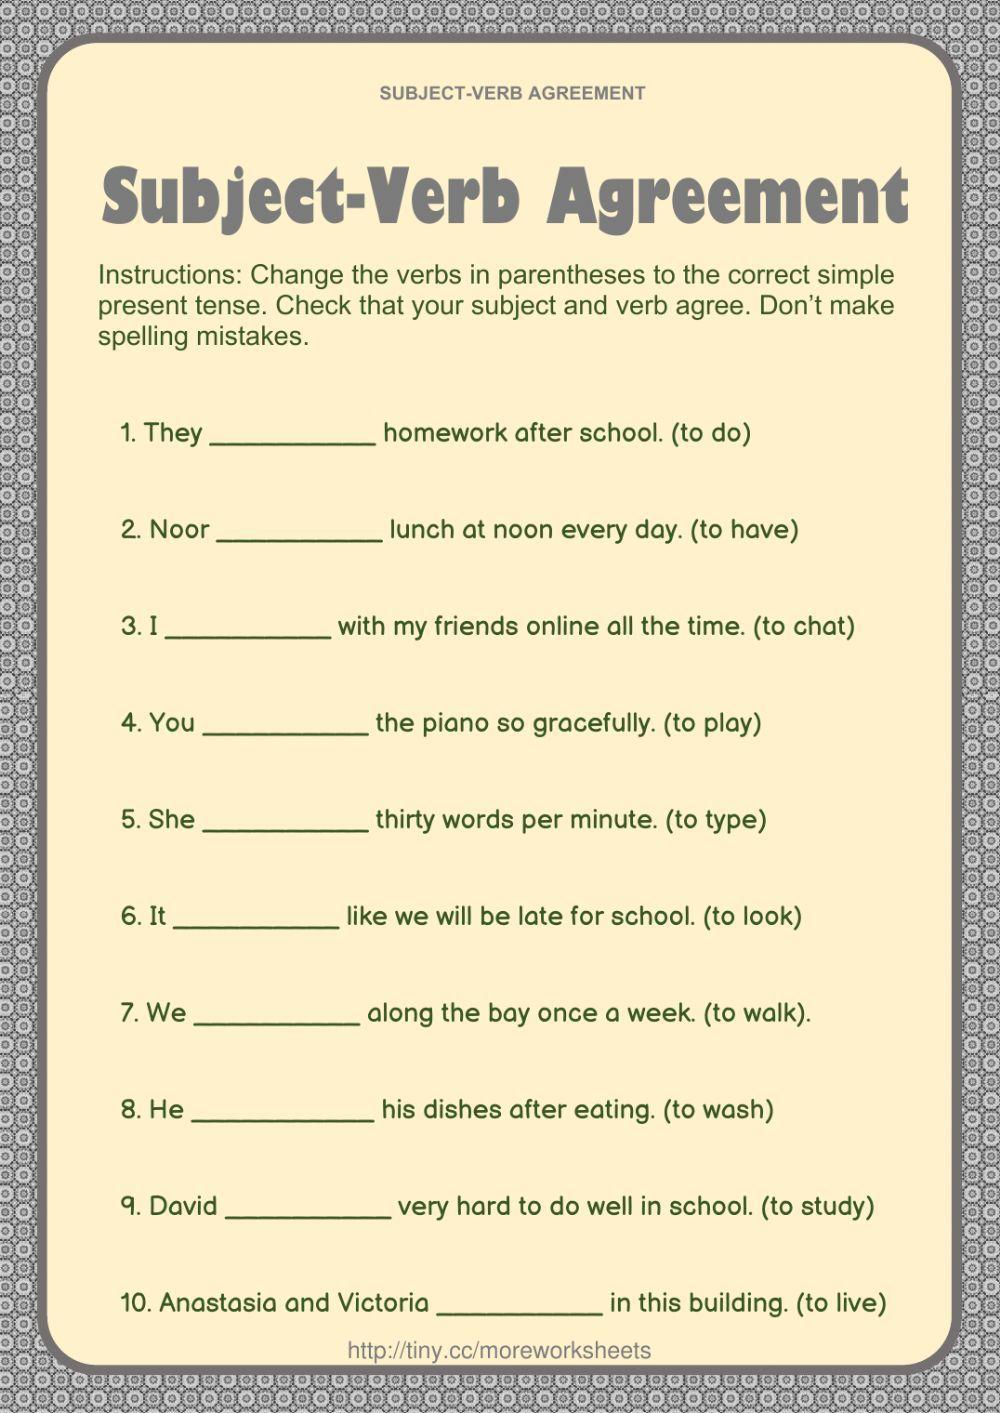 Subject-verb Agreement